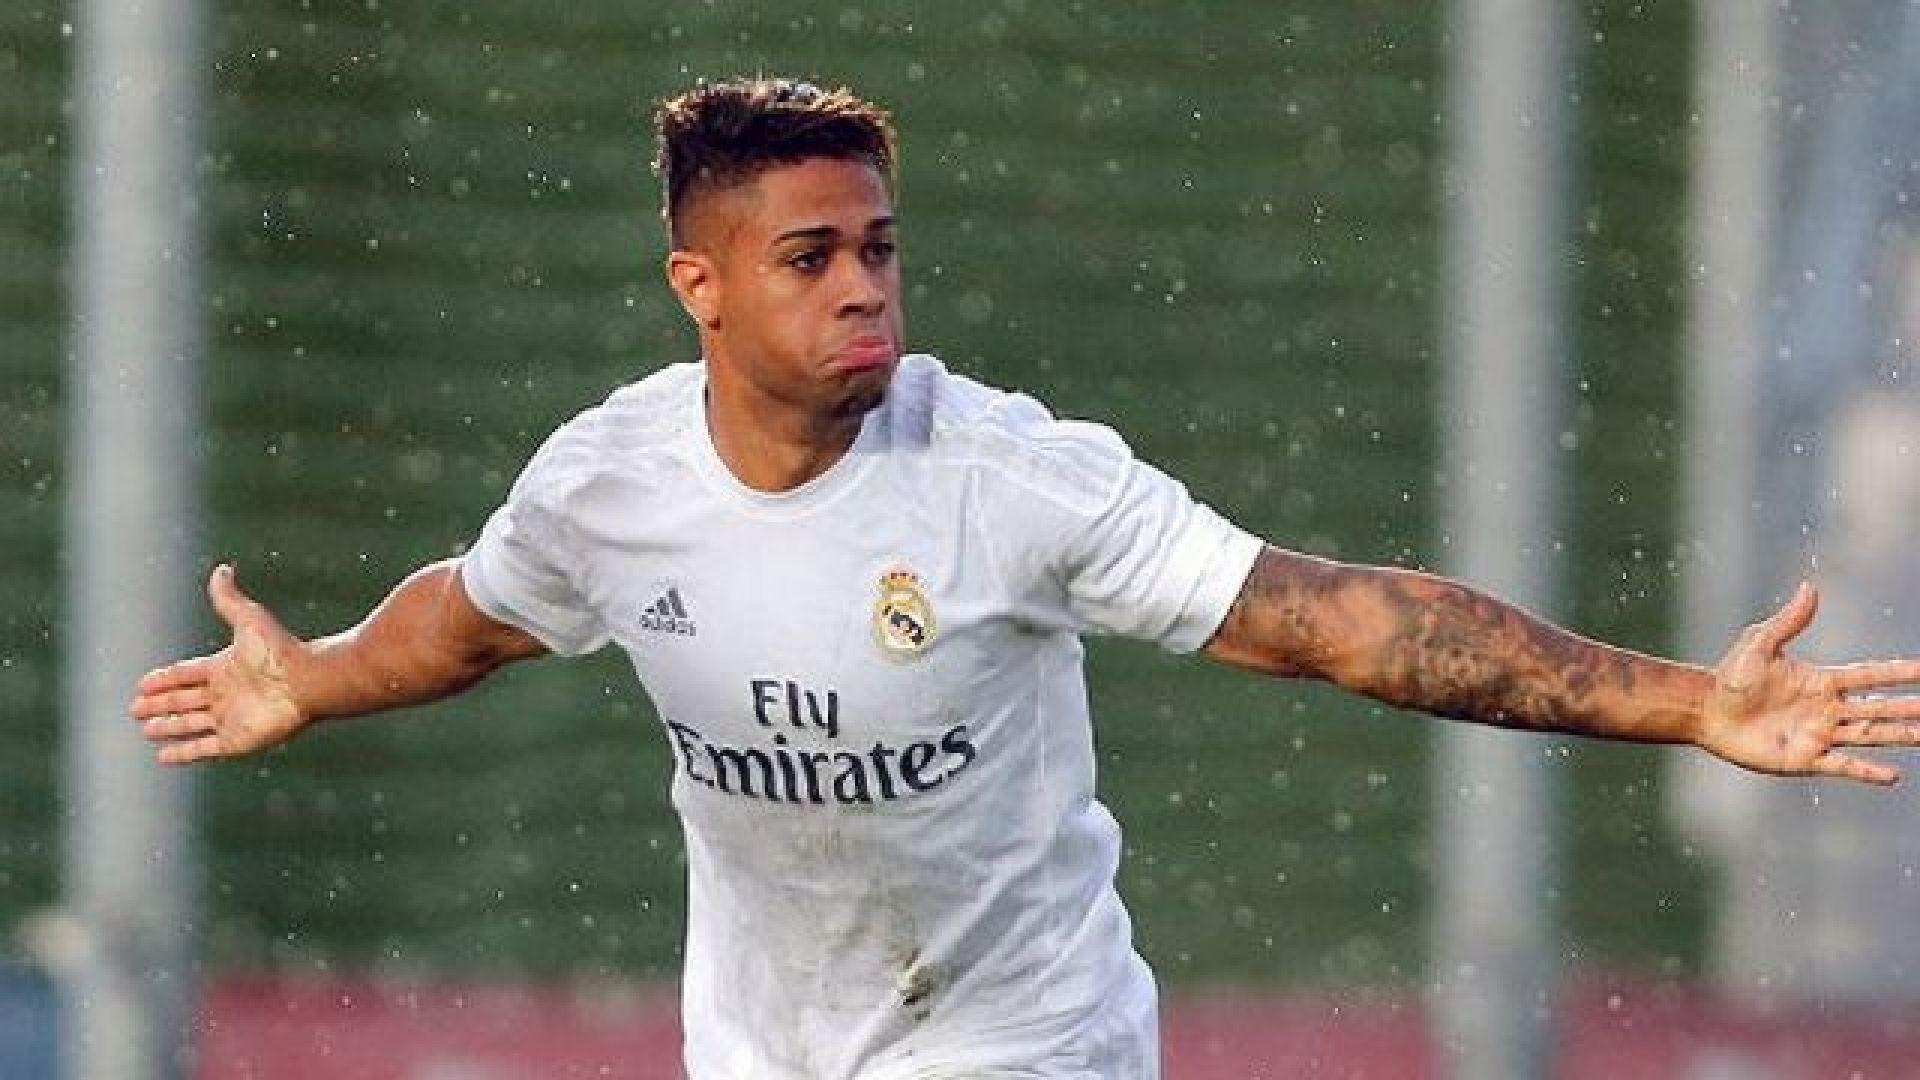 Lyon completes the signing of Mariano Diaz Mejia from Real Madrid